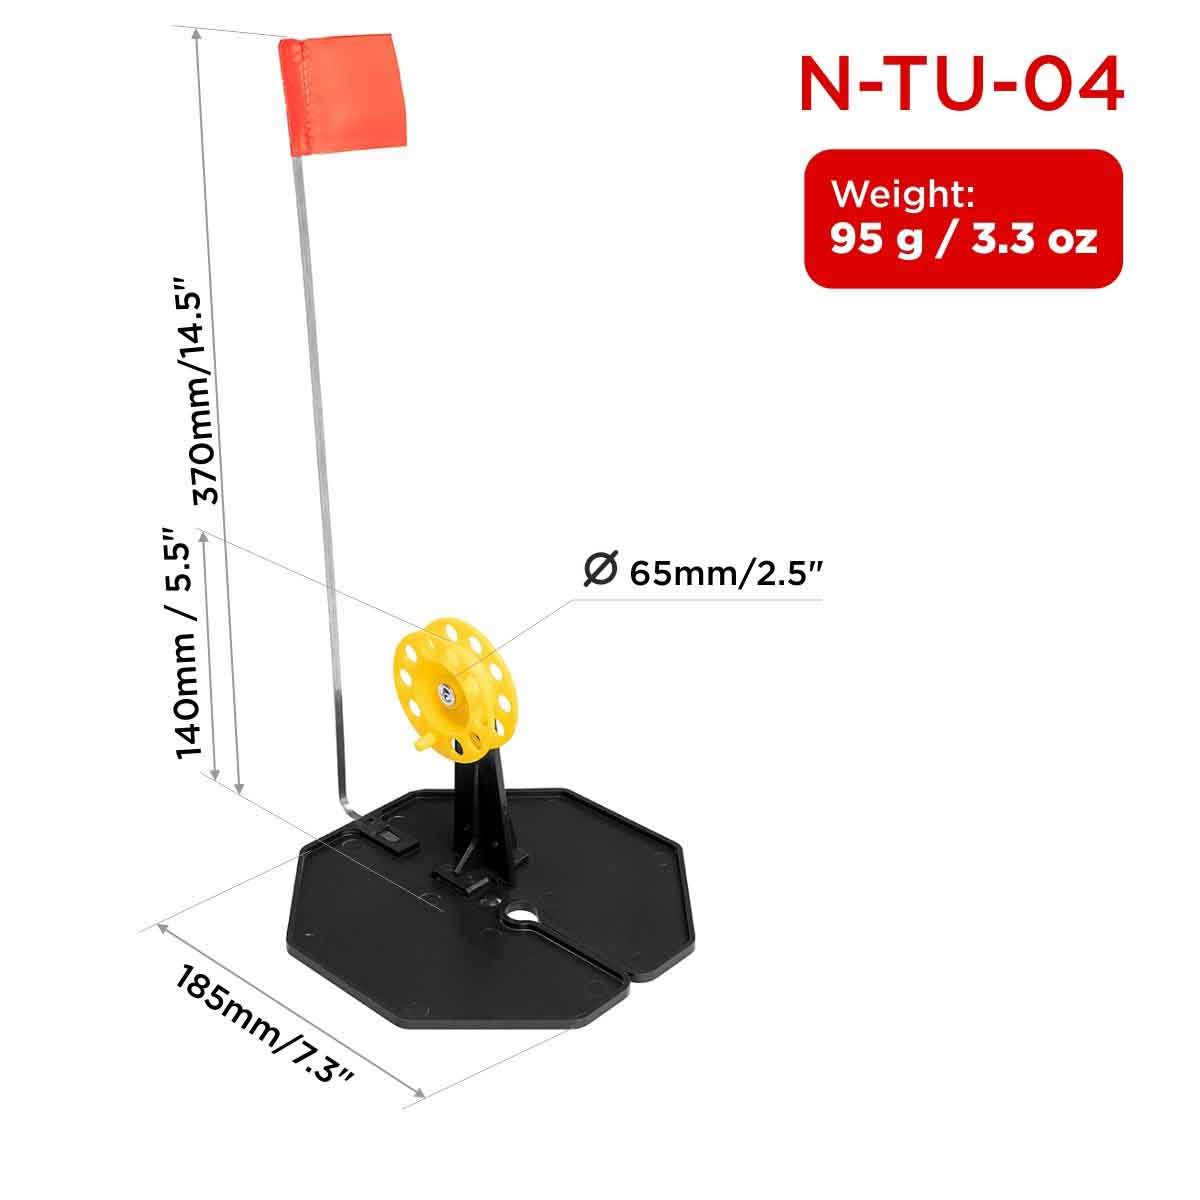 Tip-up Pop-Up Integrated Hole-Cover Easy to Clip N-Tu-04 weighs 3.3 oz, the base is 7.3 inches long, the flag shaft is 14.5 inches, the spool diameter is 2.5 inches and its height is 5.5 inches